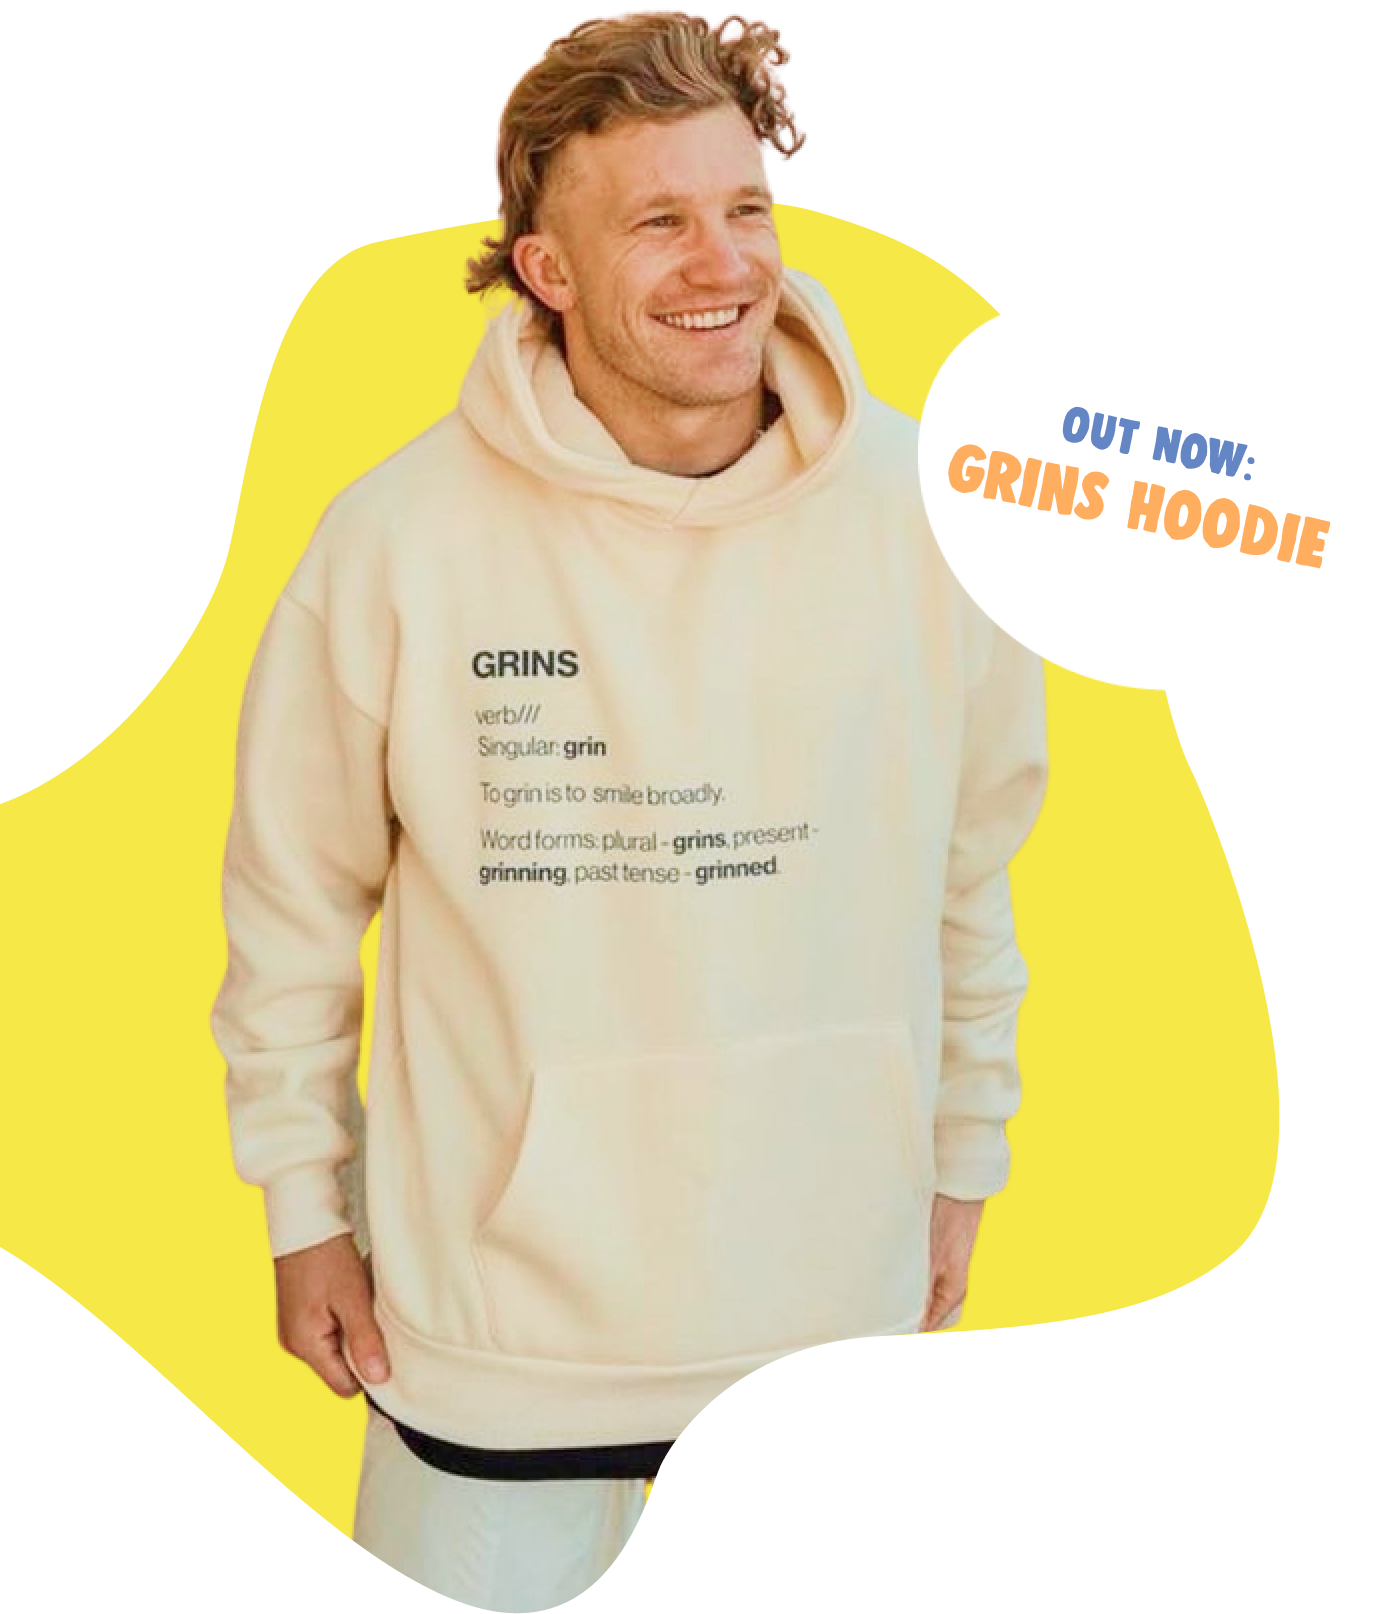 Out Now: Grins Hoodie